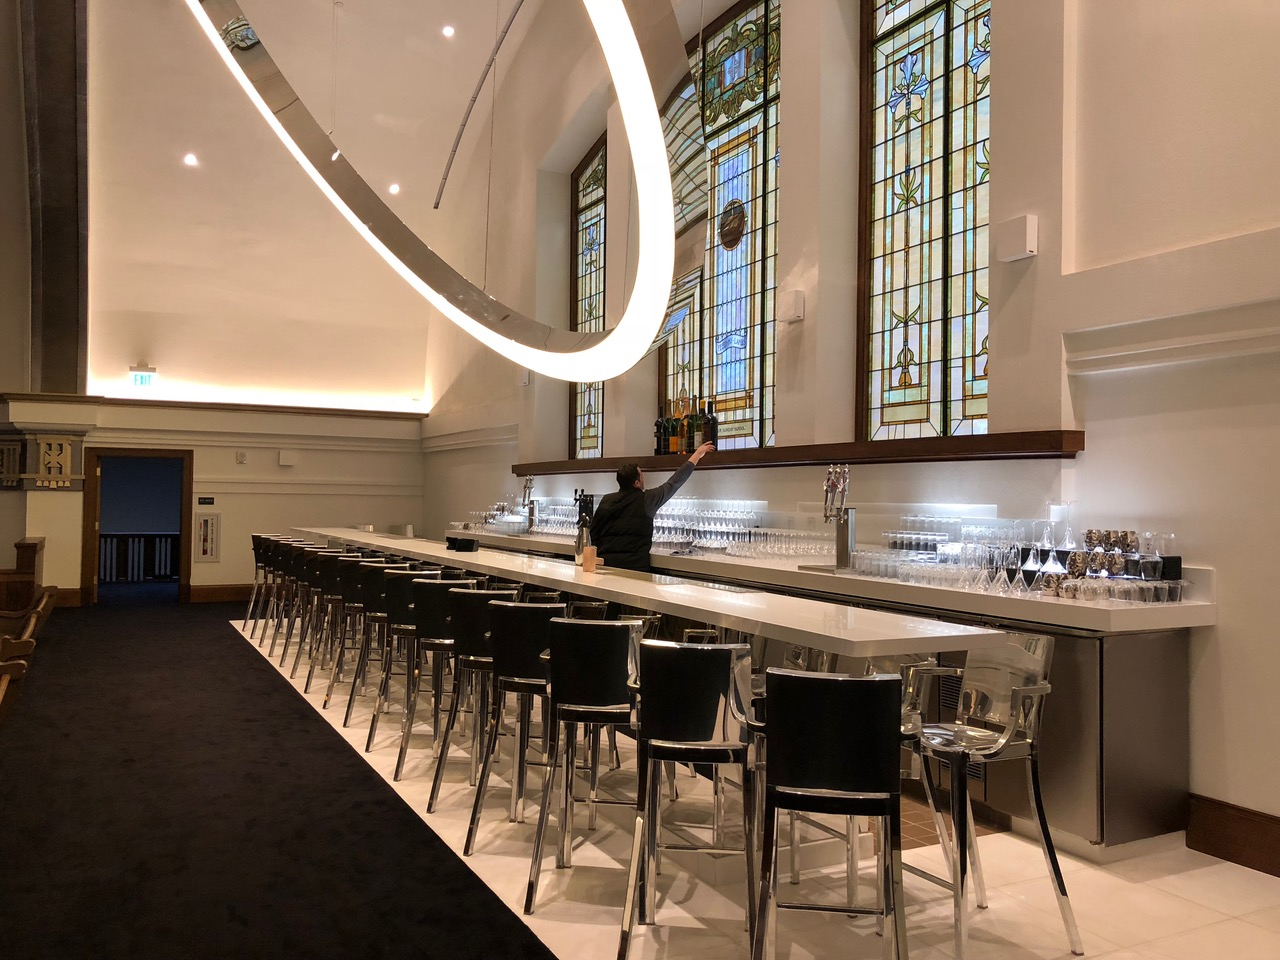 The Halo Bar in the Sanctuary